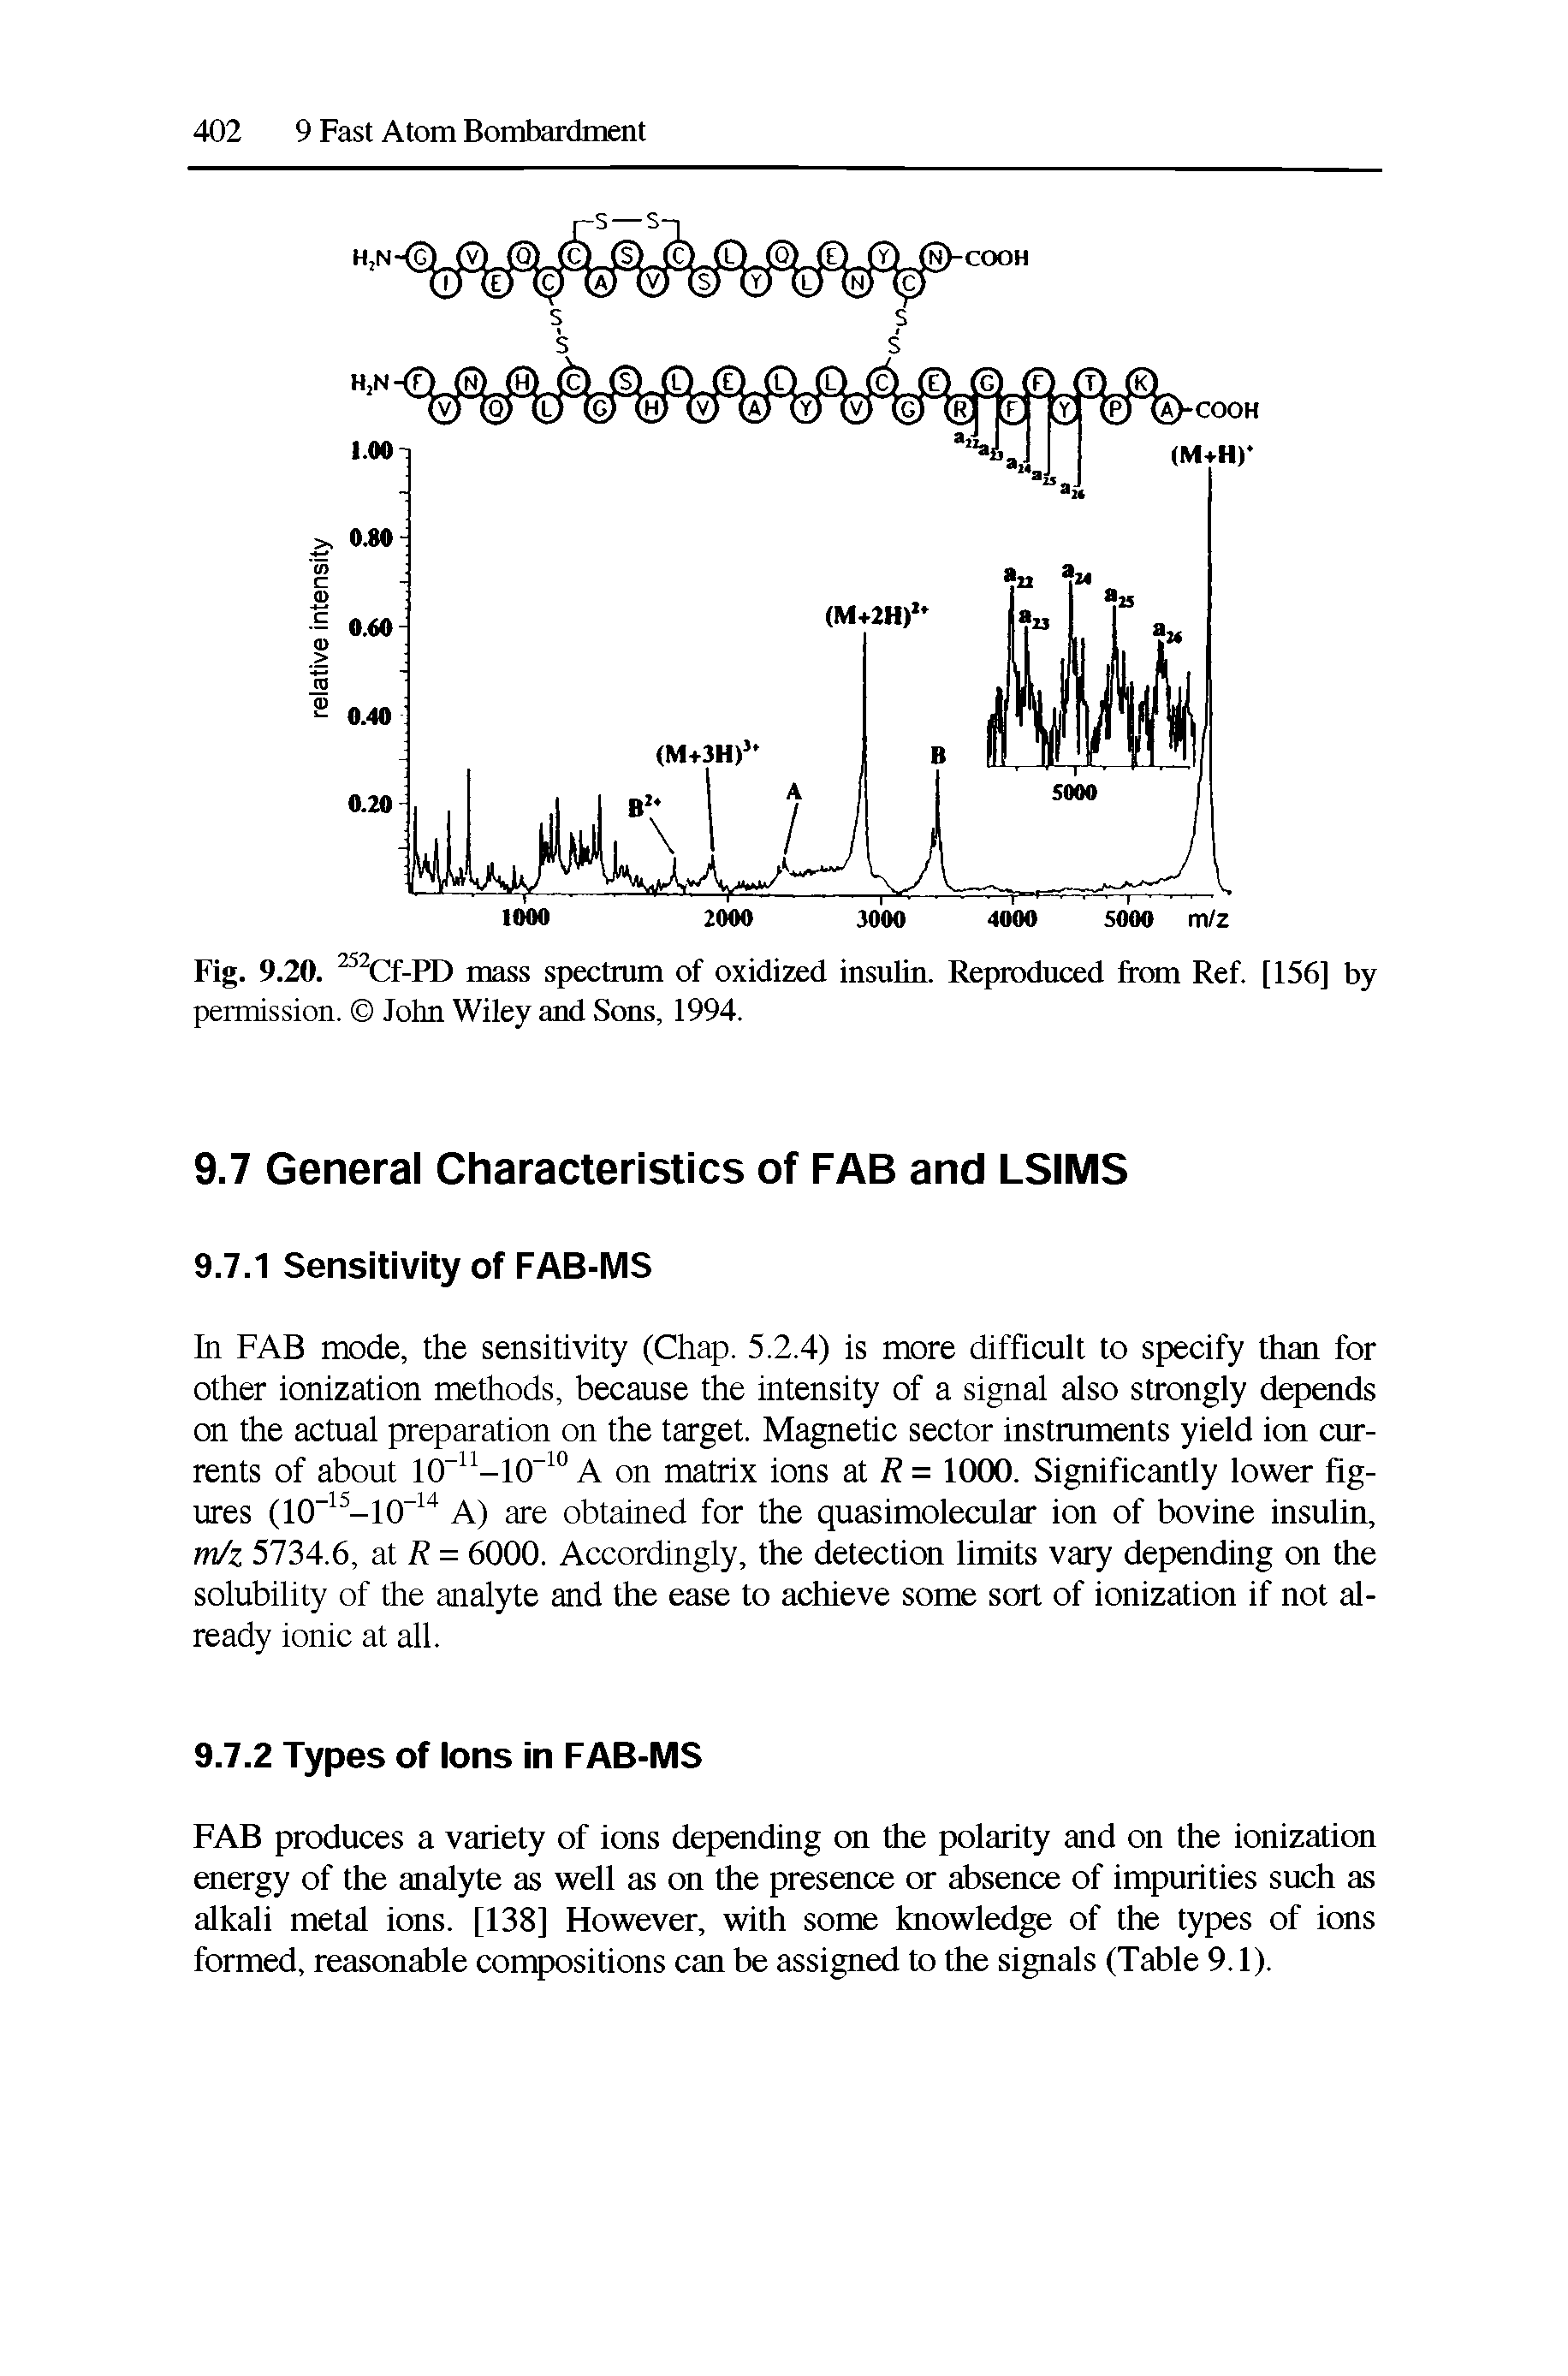 Fig. 9.20. Cf-PD mass spectrum of oxidized insulin. Reproduced from Ref. [156] by permission. John Wiley and Sons, 1994.